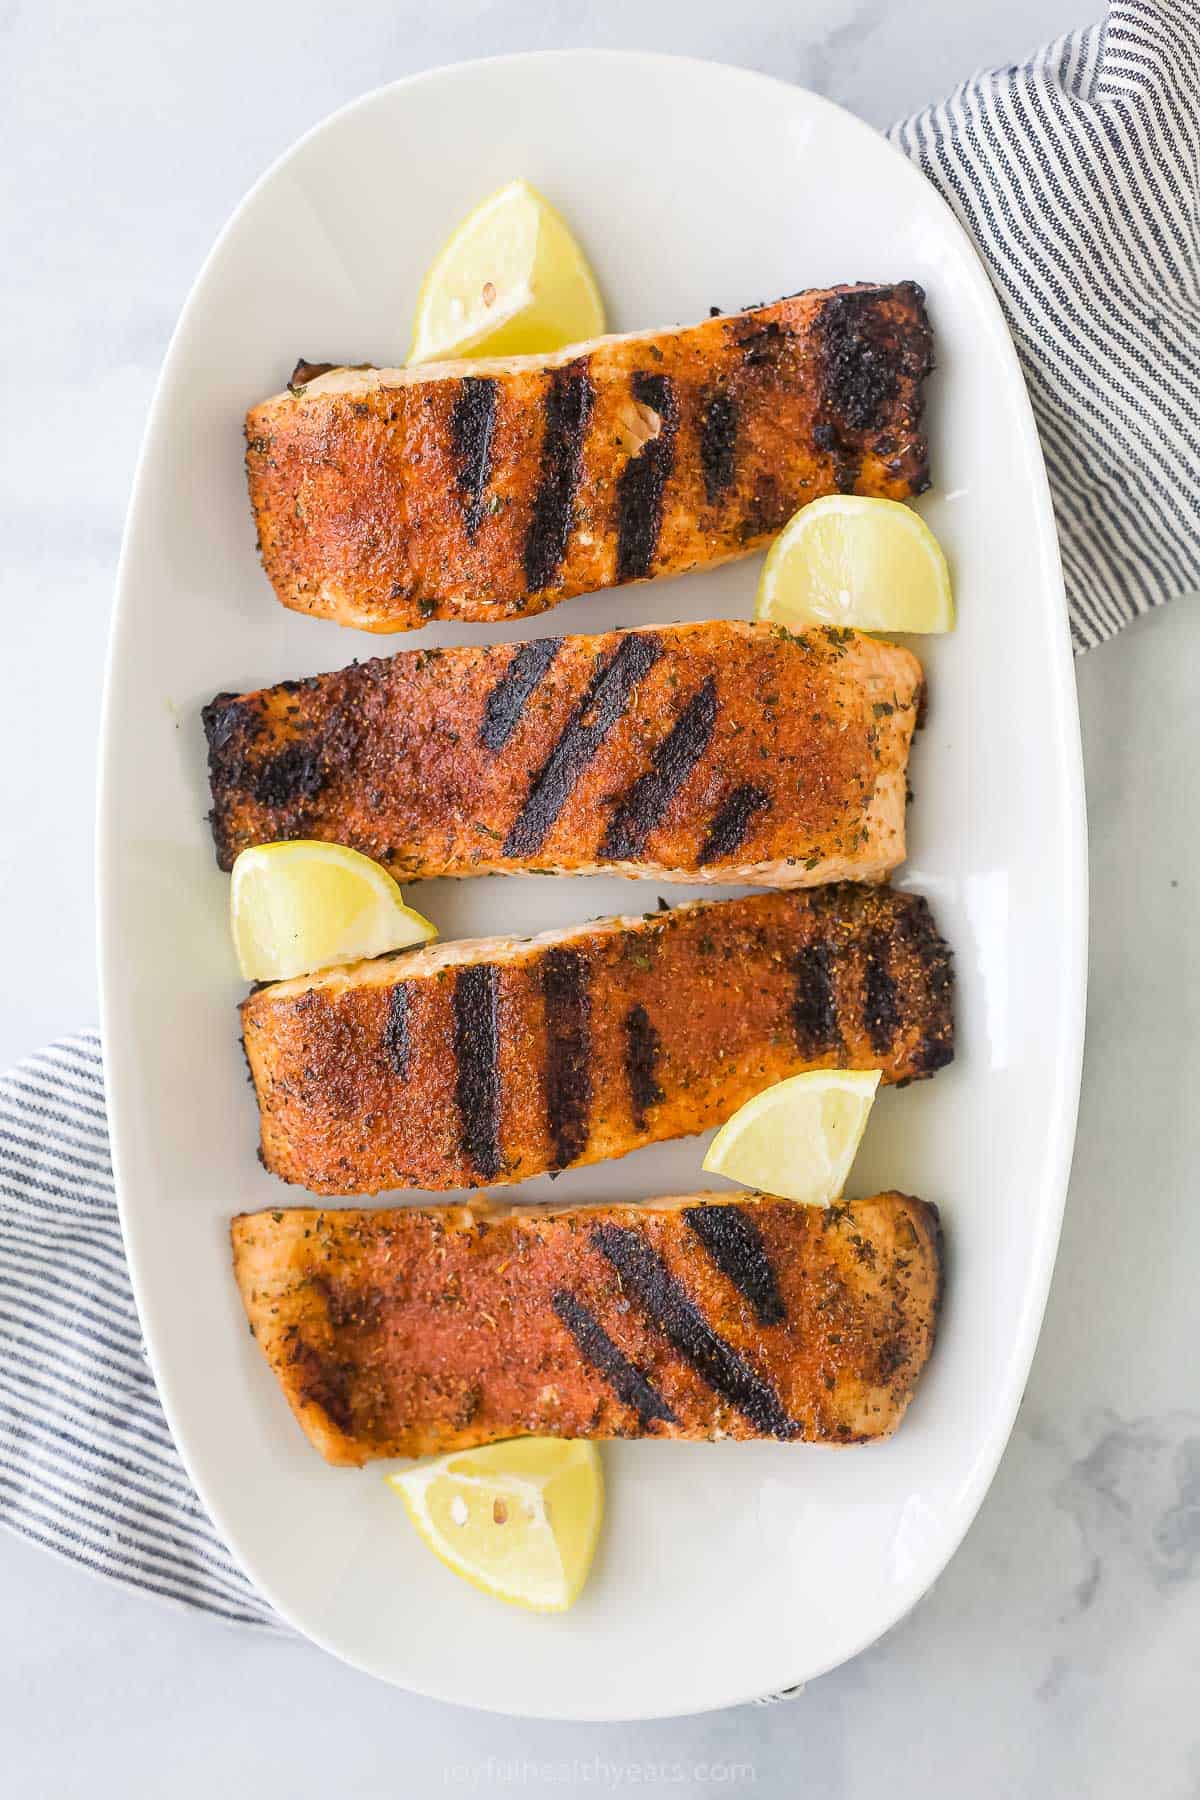 Grilled salmon fillets on a serving platter on top of a striped kitchen towel.